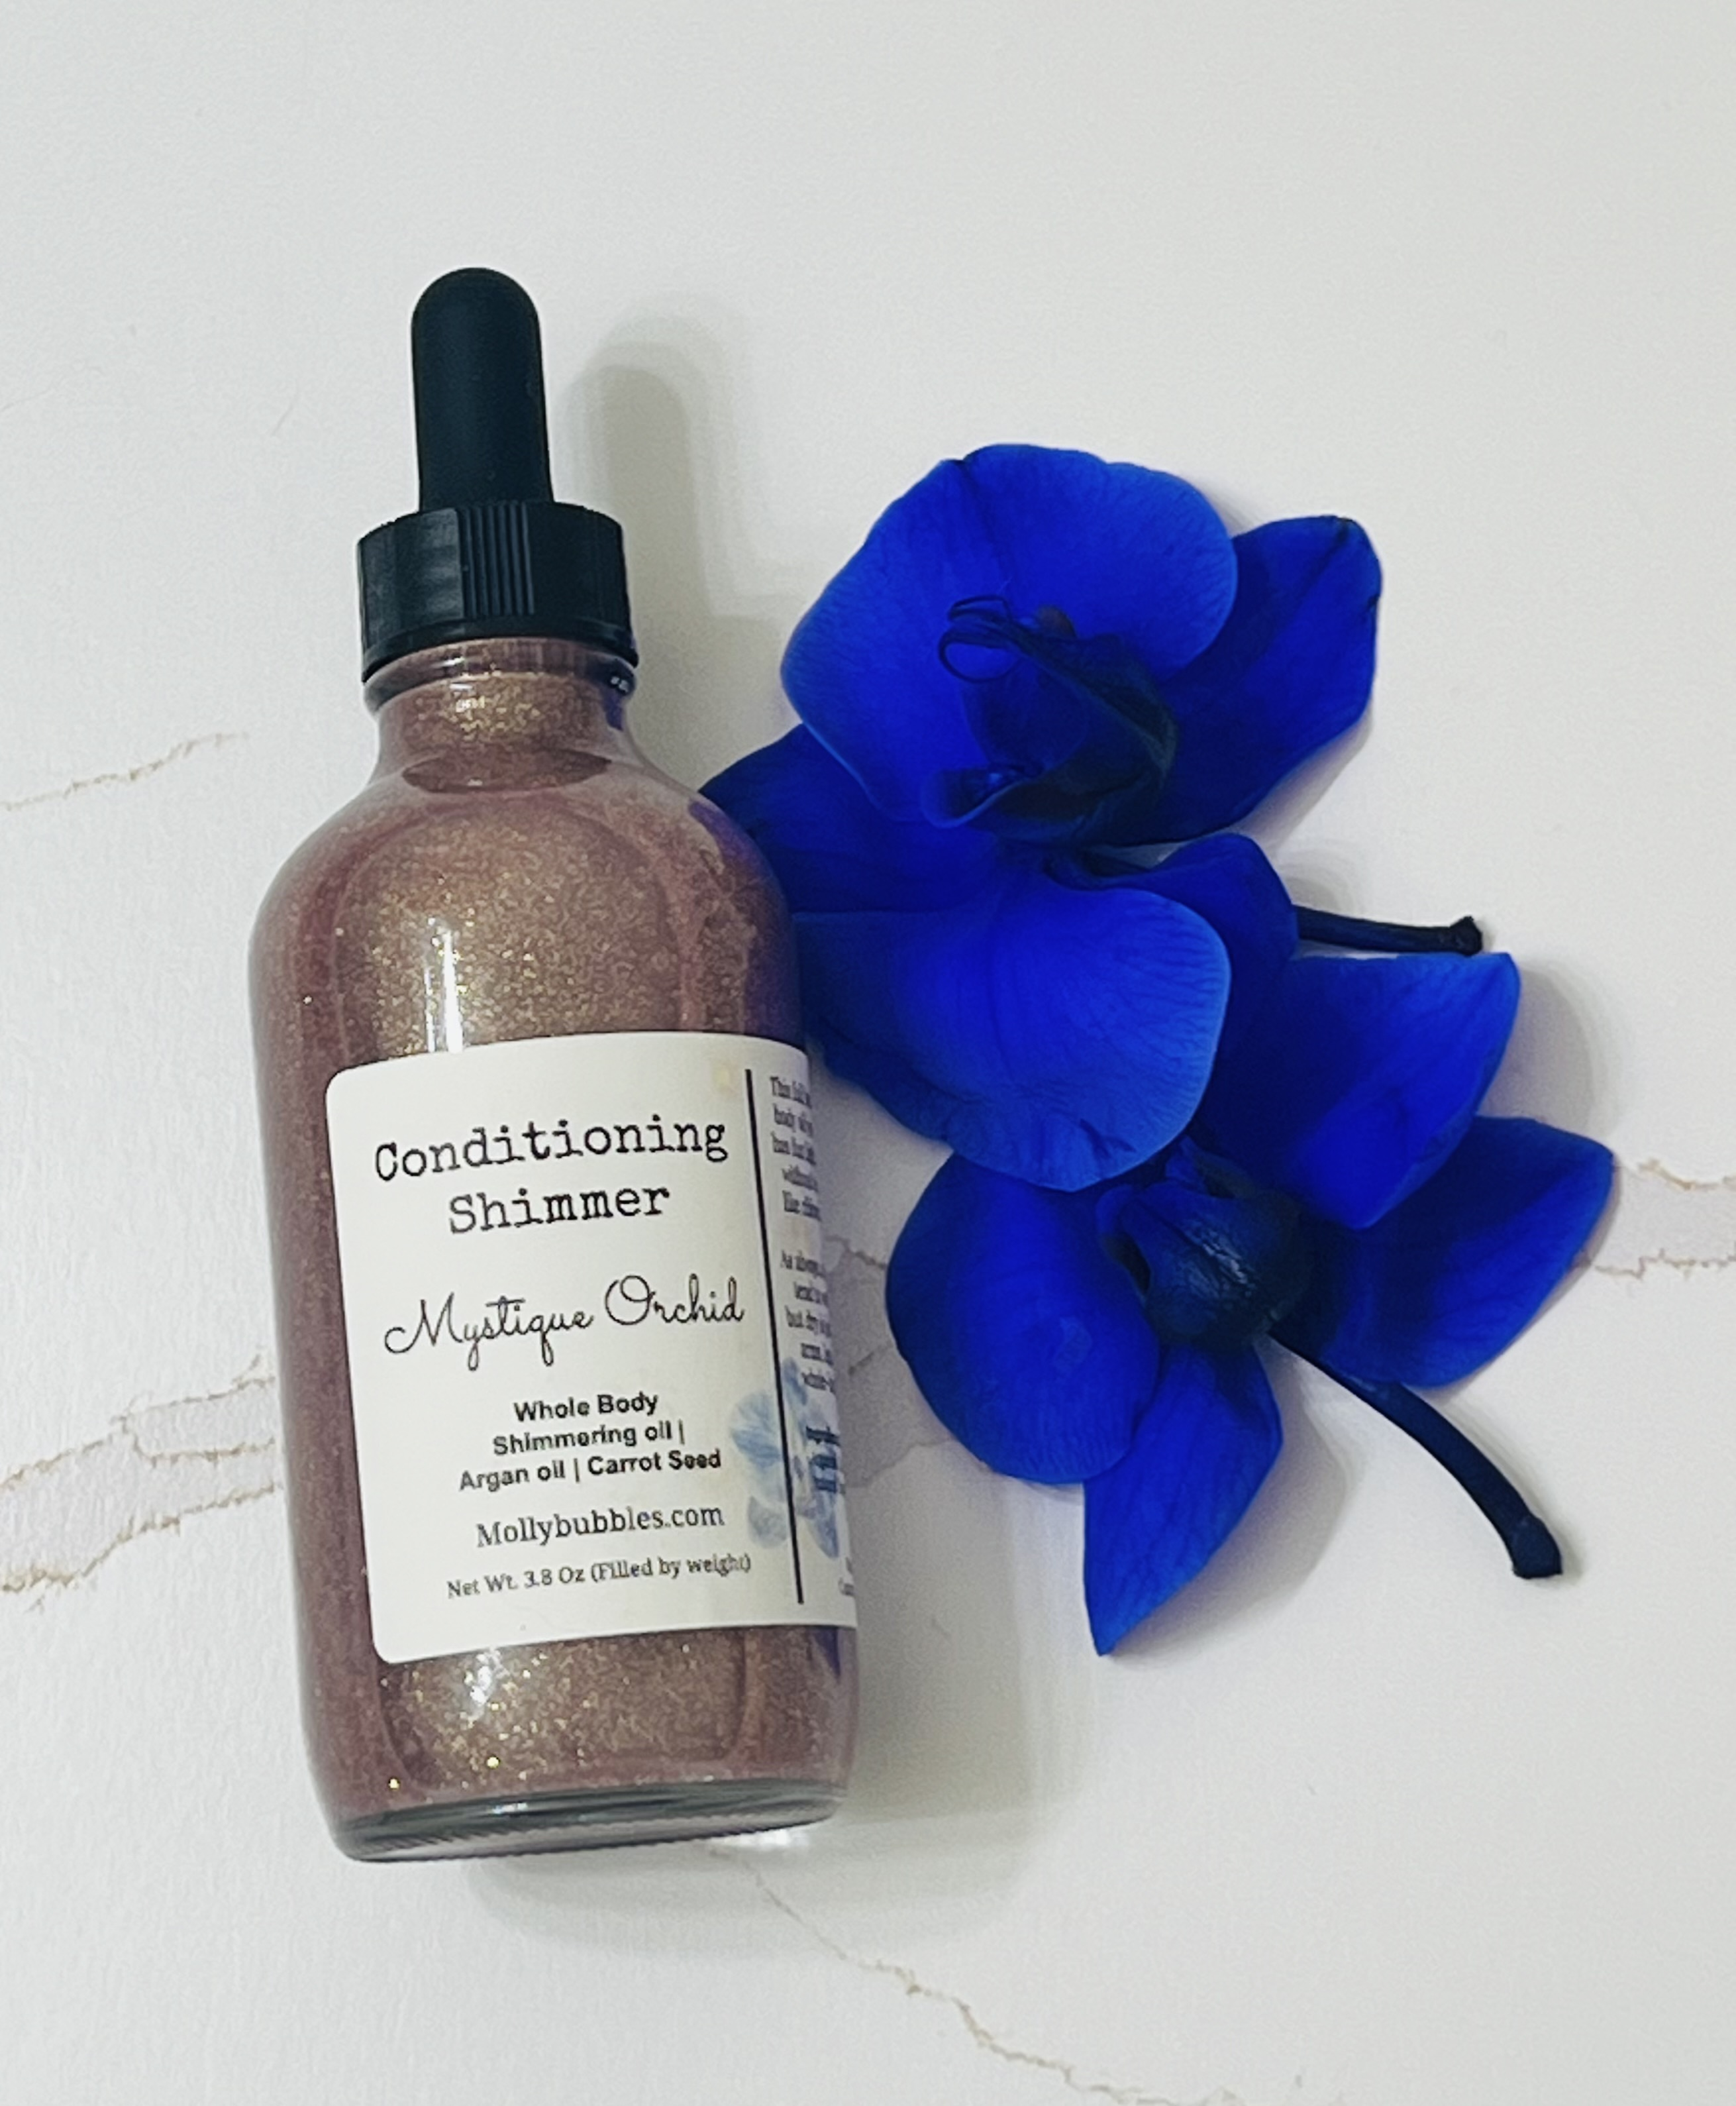 Conditioning Shimmer - Mystique Orchid (Whole Body Shimmering oil | Argan oil | Carrot Seed oil | Vitamin E)